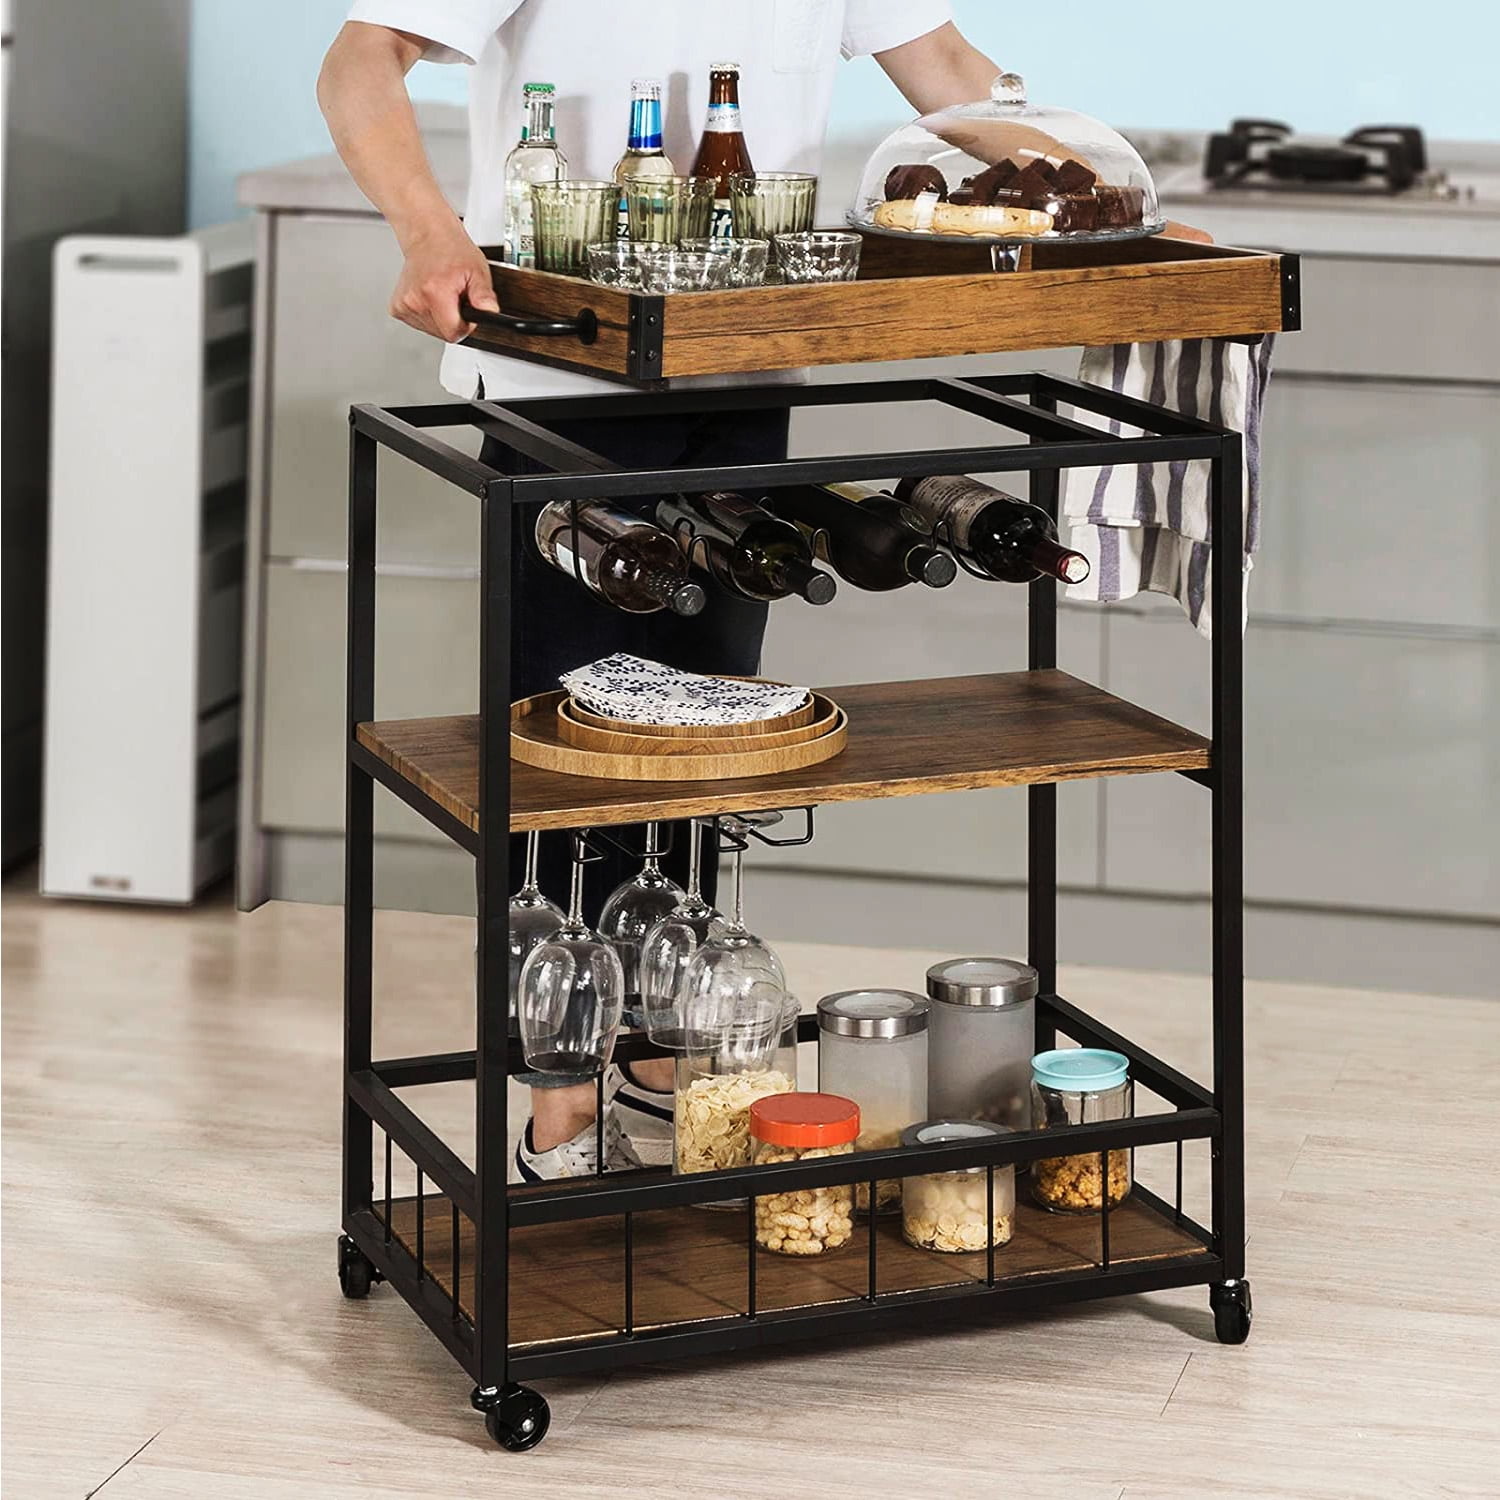 Charcoal Gray and Black ULRC072B04 Utility Cart with Wheels and Handle VASAGLE Bar Cart Universal Casters with Brakes Kitchen Serving Cart Leveling Feet